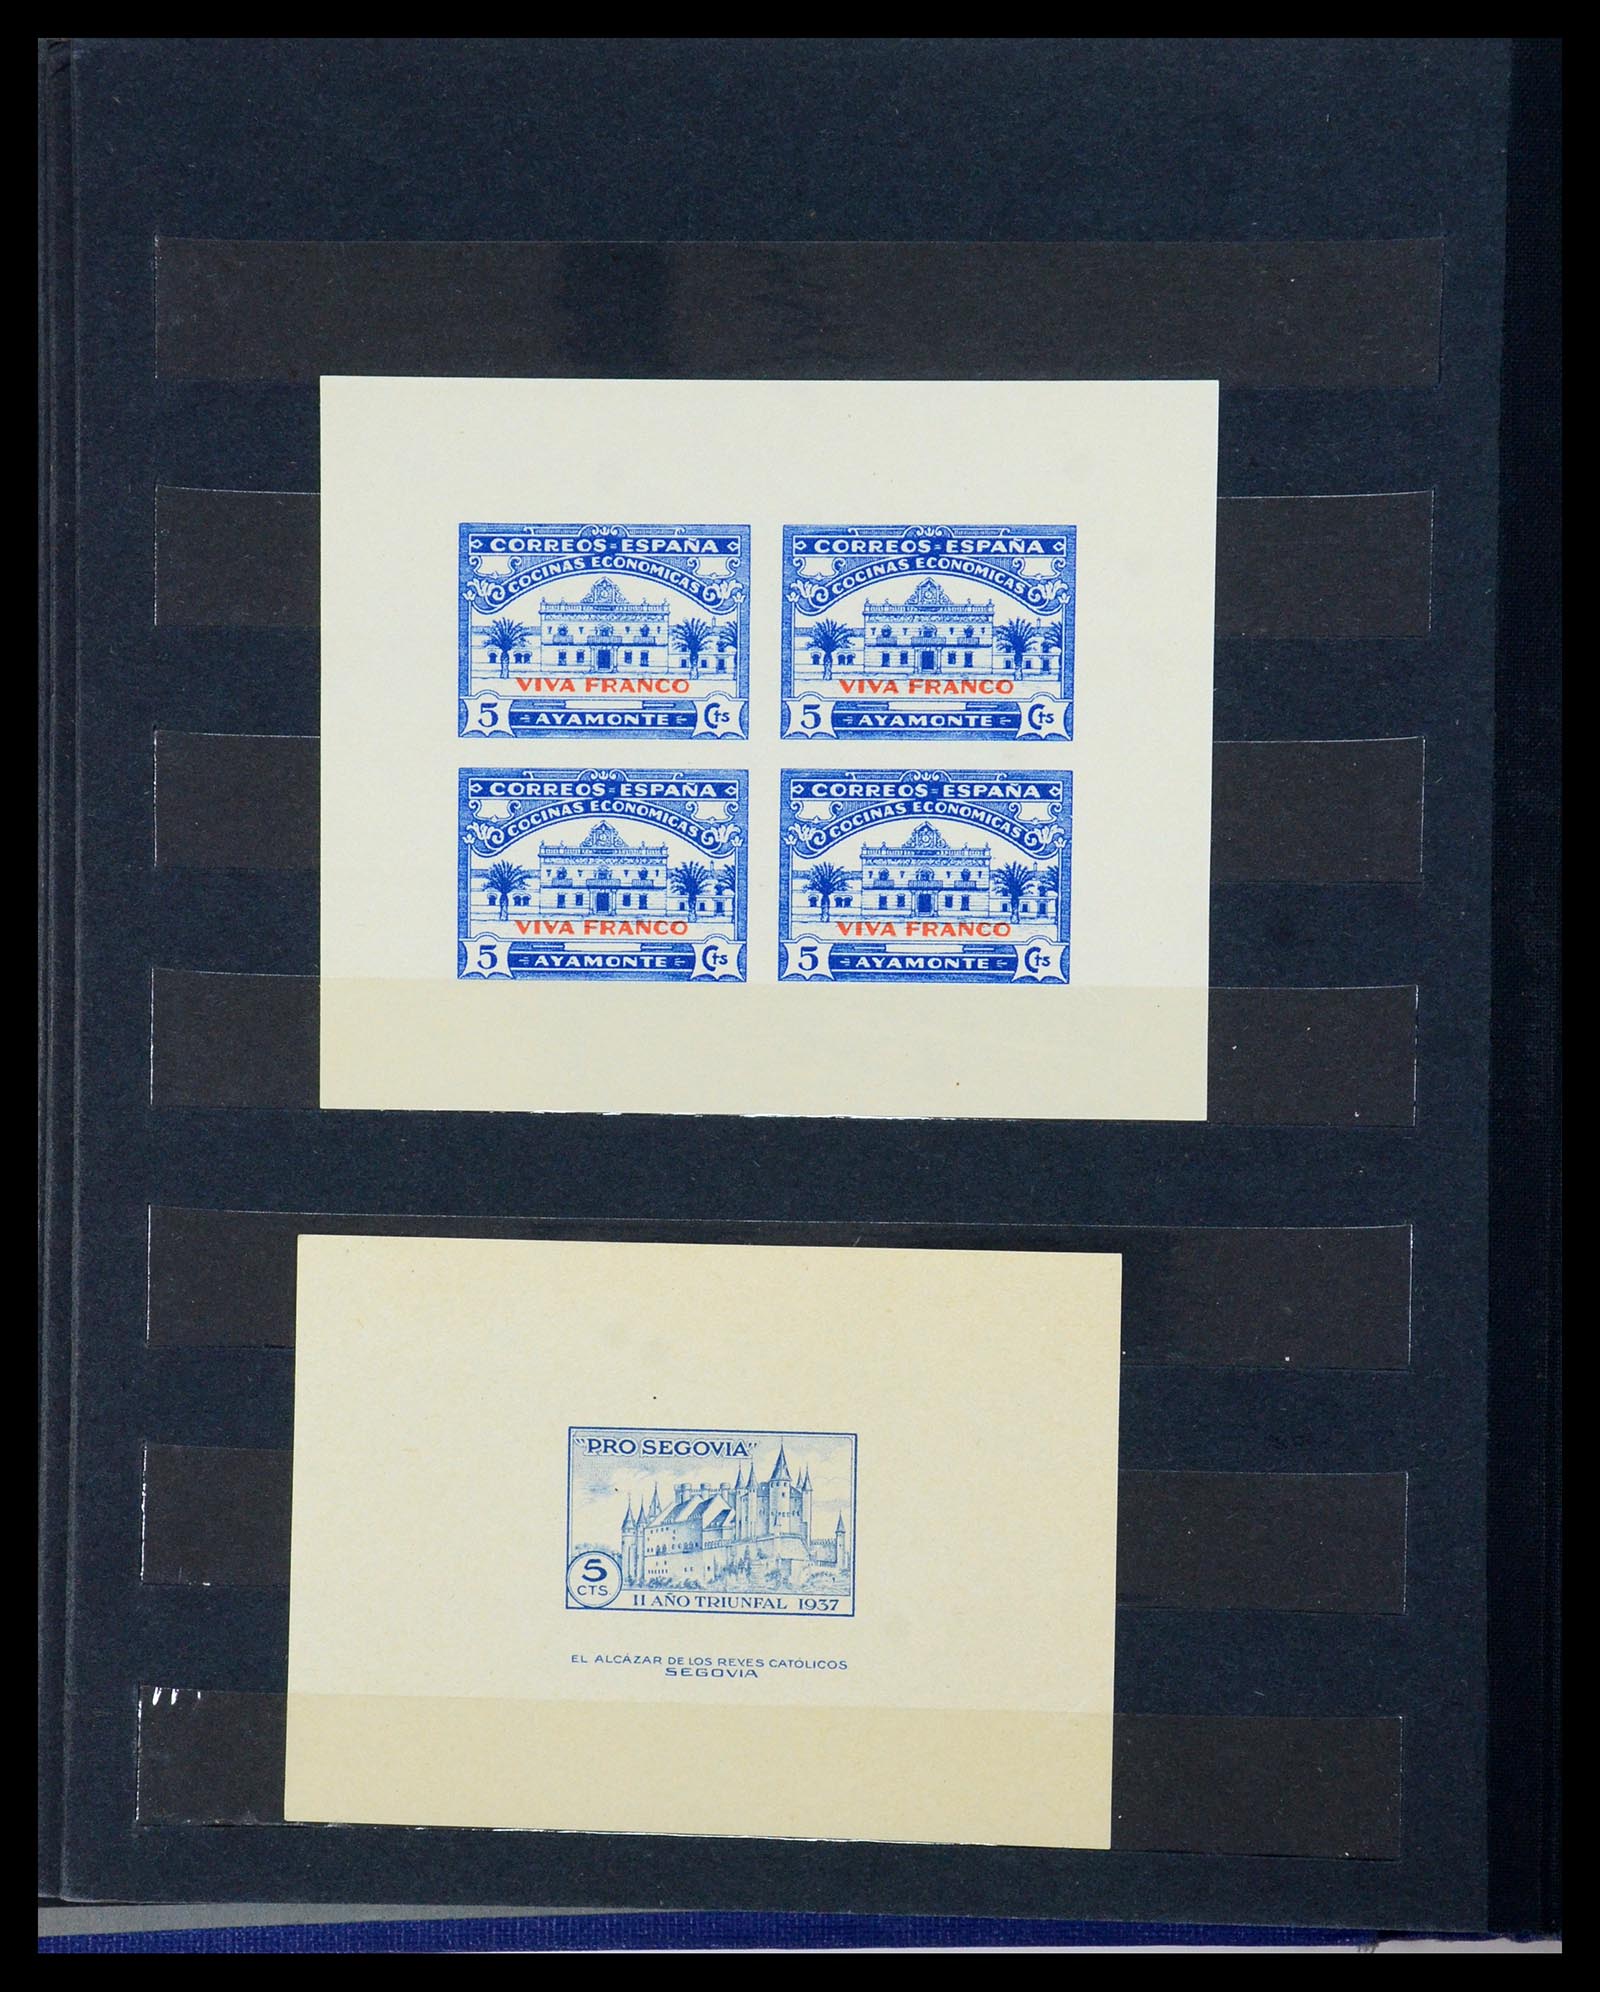 35824 016 - Stamp Collection 35824 Spanish civil war and local issues 1936-1937.